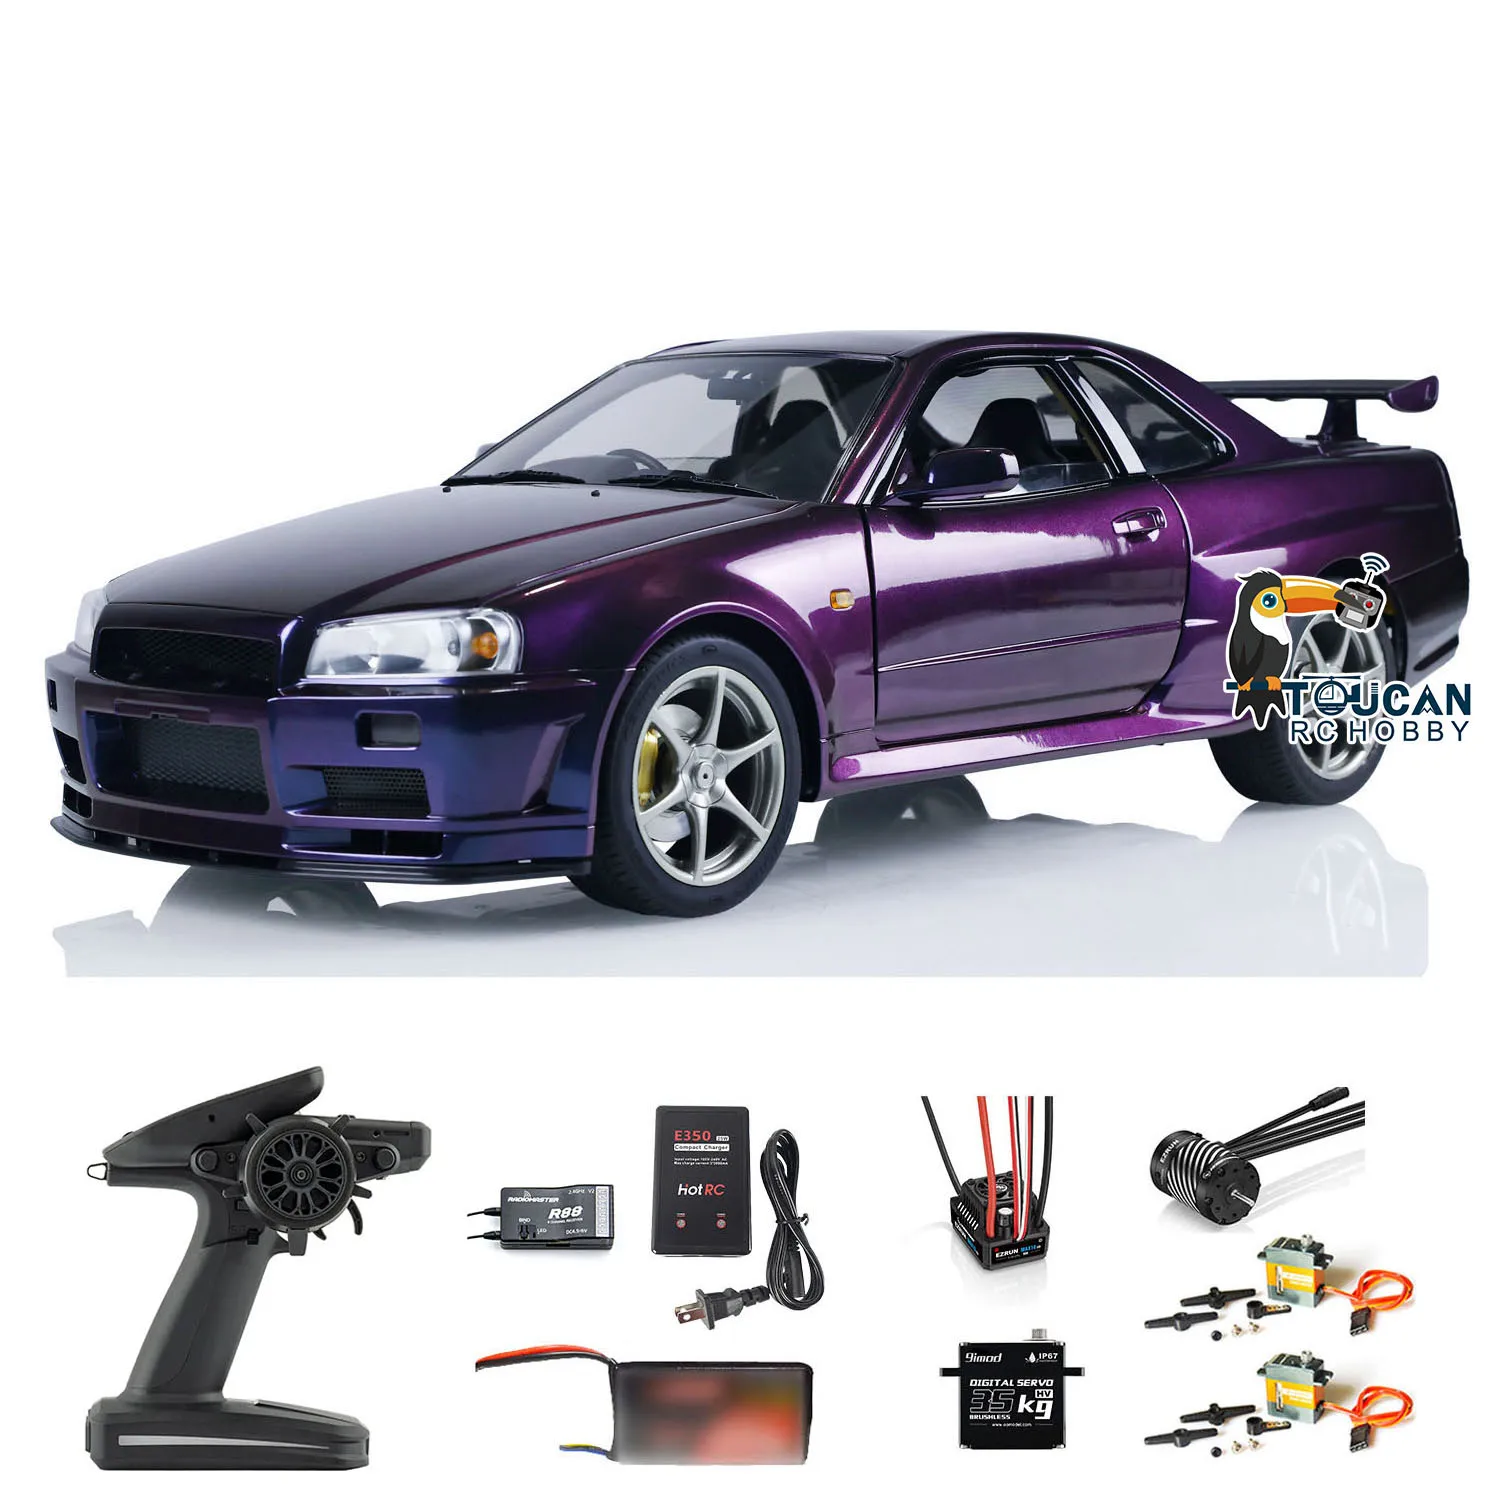 

SALE Capo R34 1/8 RC Racing Car Midnight Purple for GTR RTR Drifting High-end Upgraded Assembled Model RC Toy THZH1504